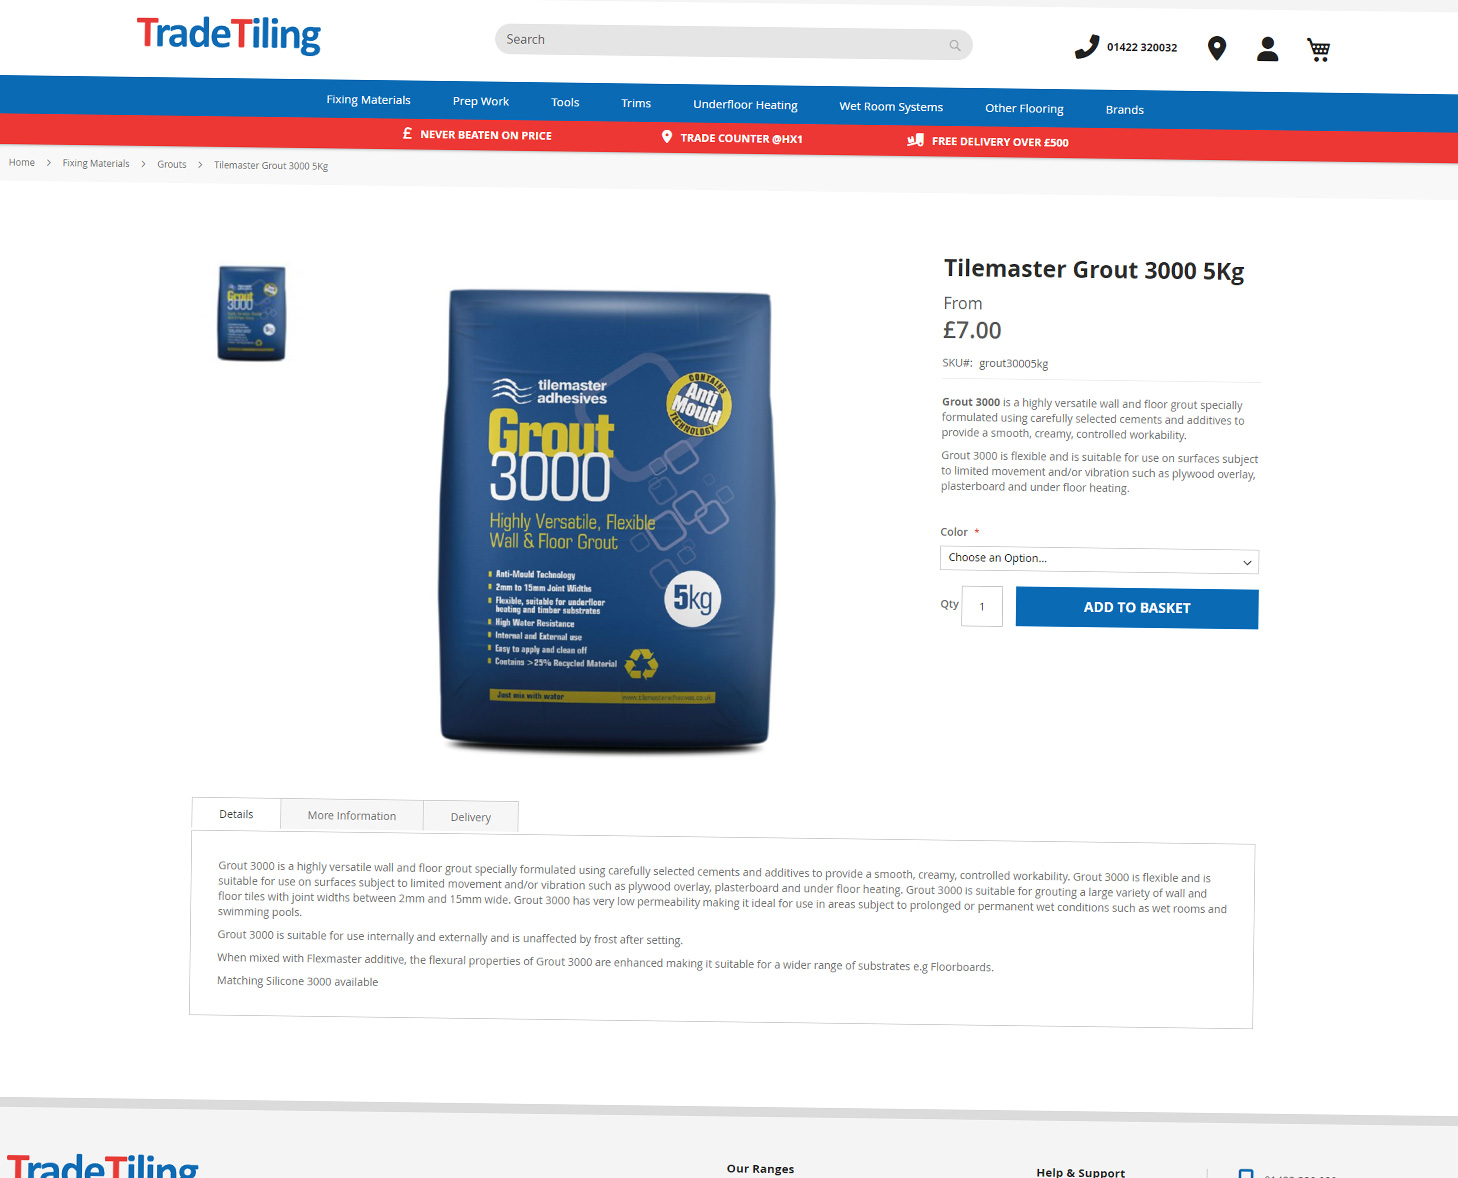 Trade Tiling Magento 2 Product Page